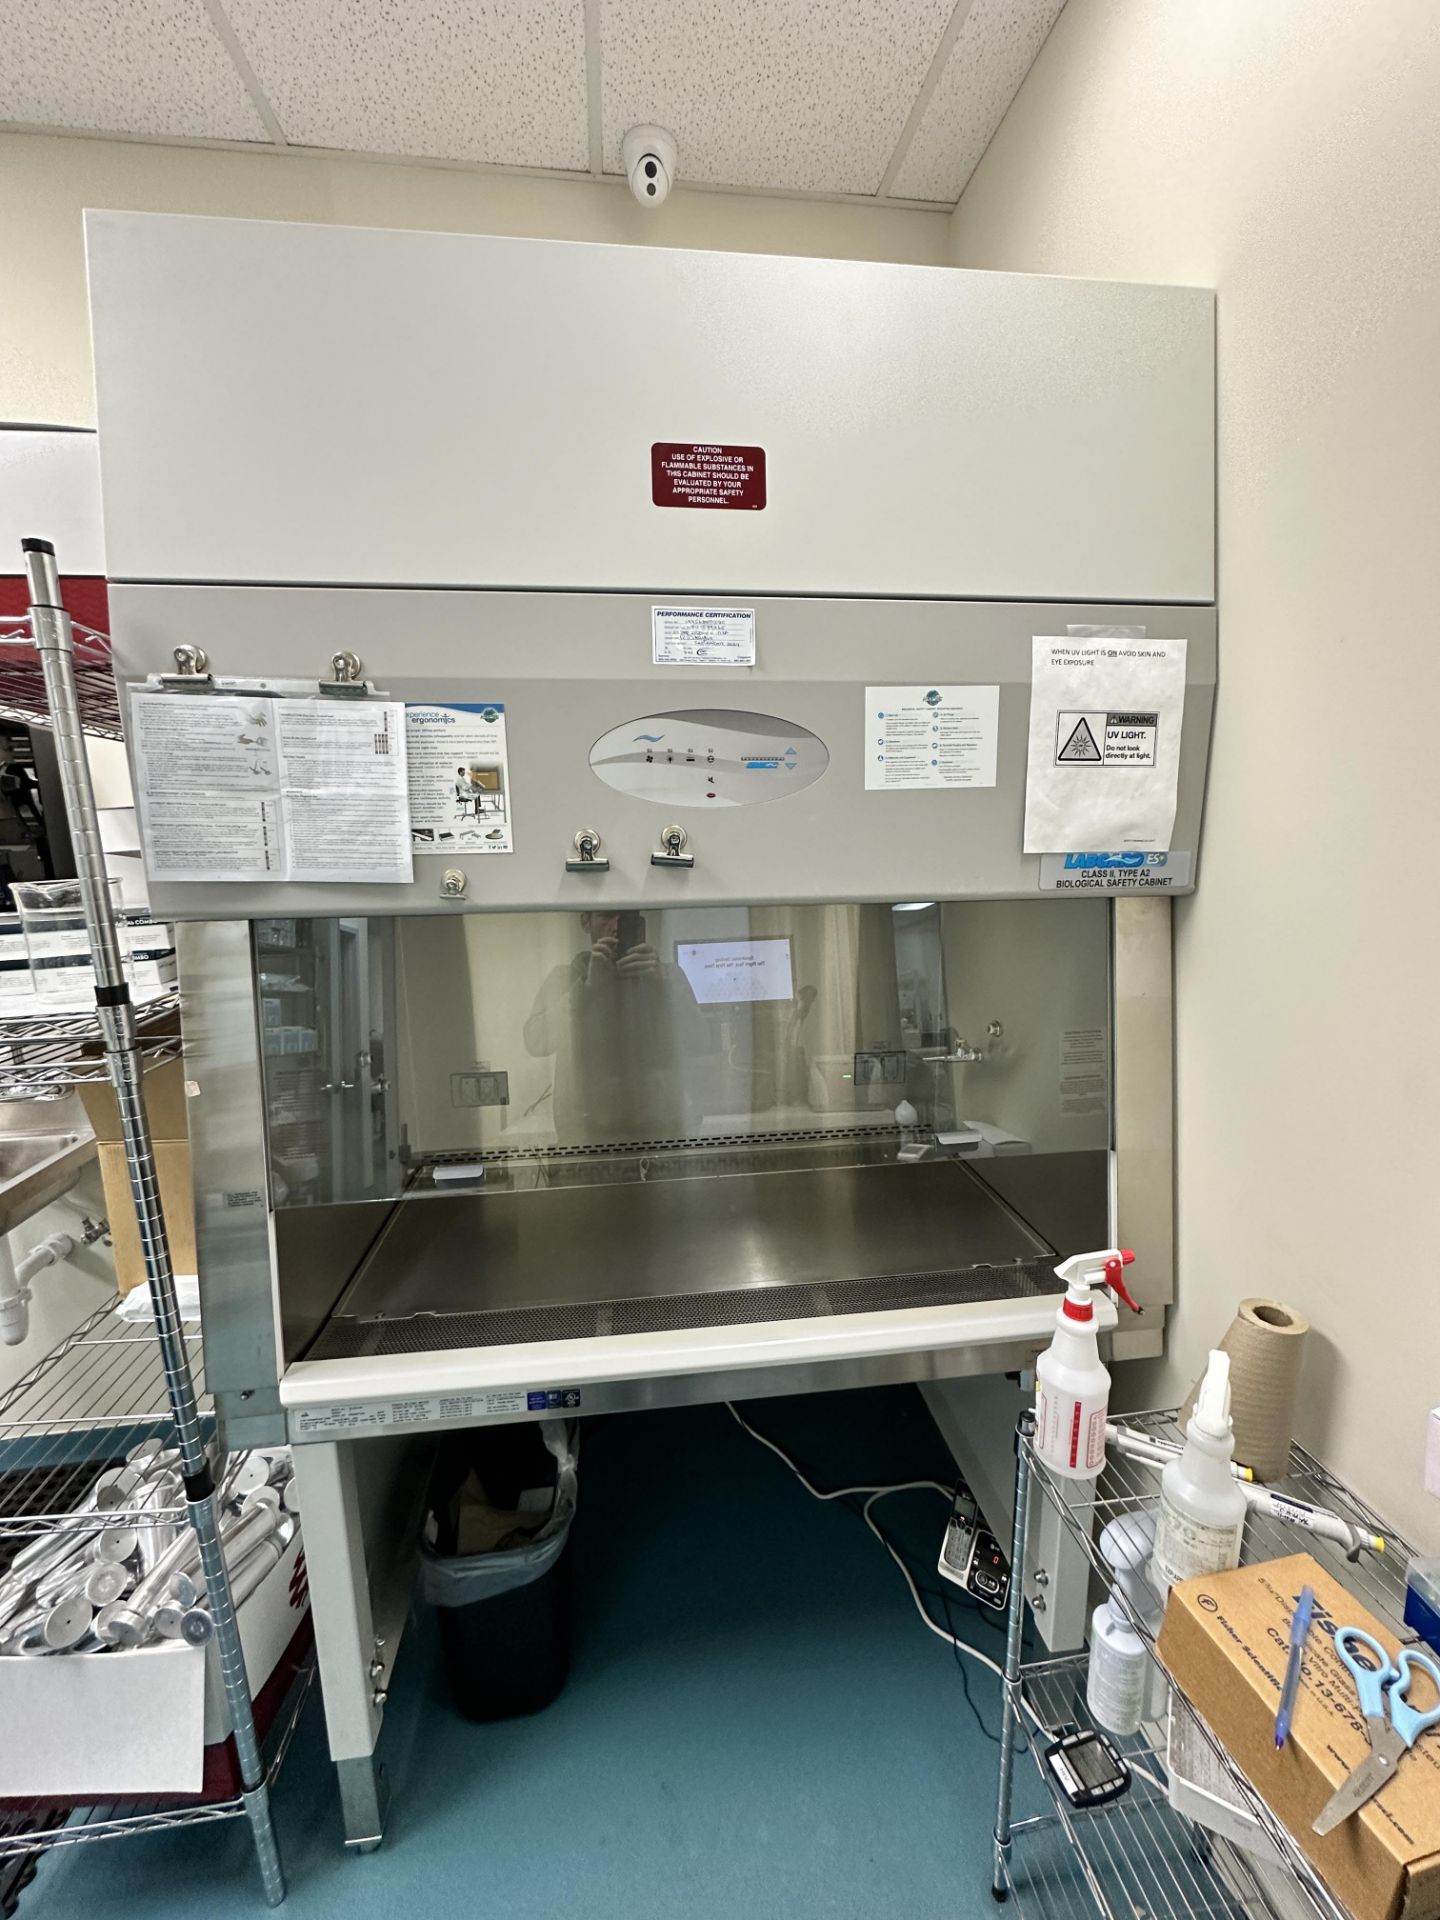 NuAire LabGard ES NU-540-400 Class II, Type A2 Biological Safety Cabinet